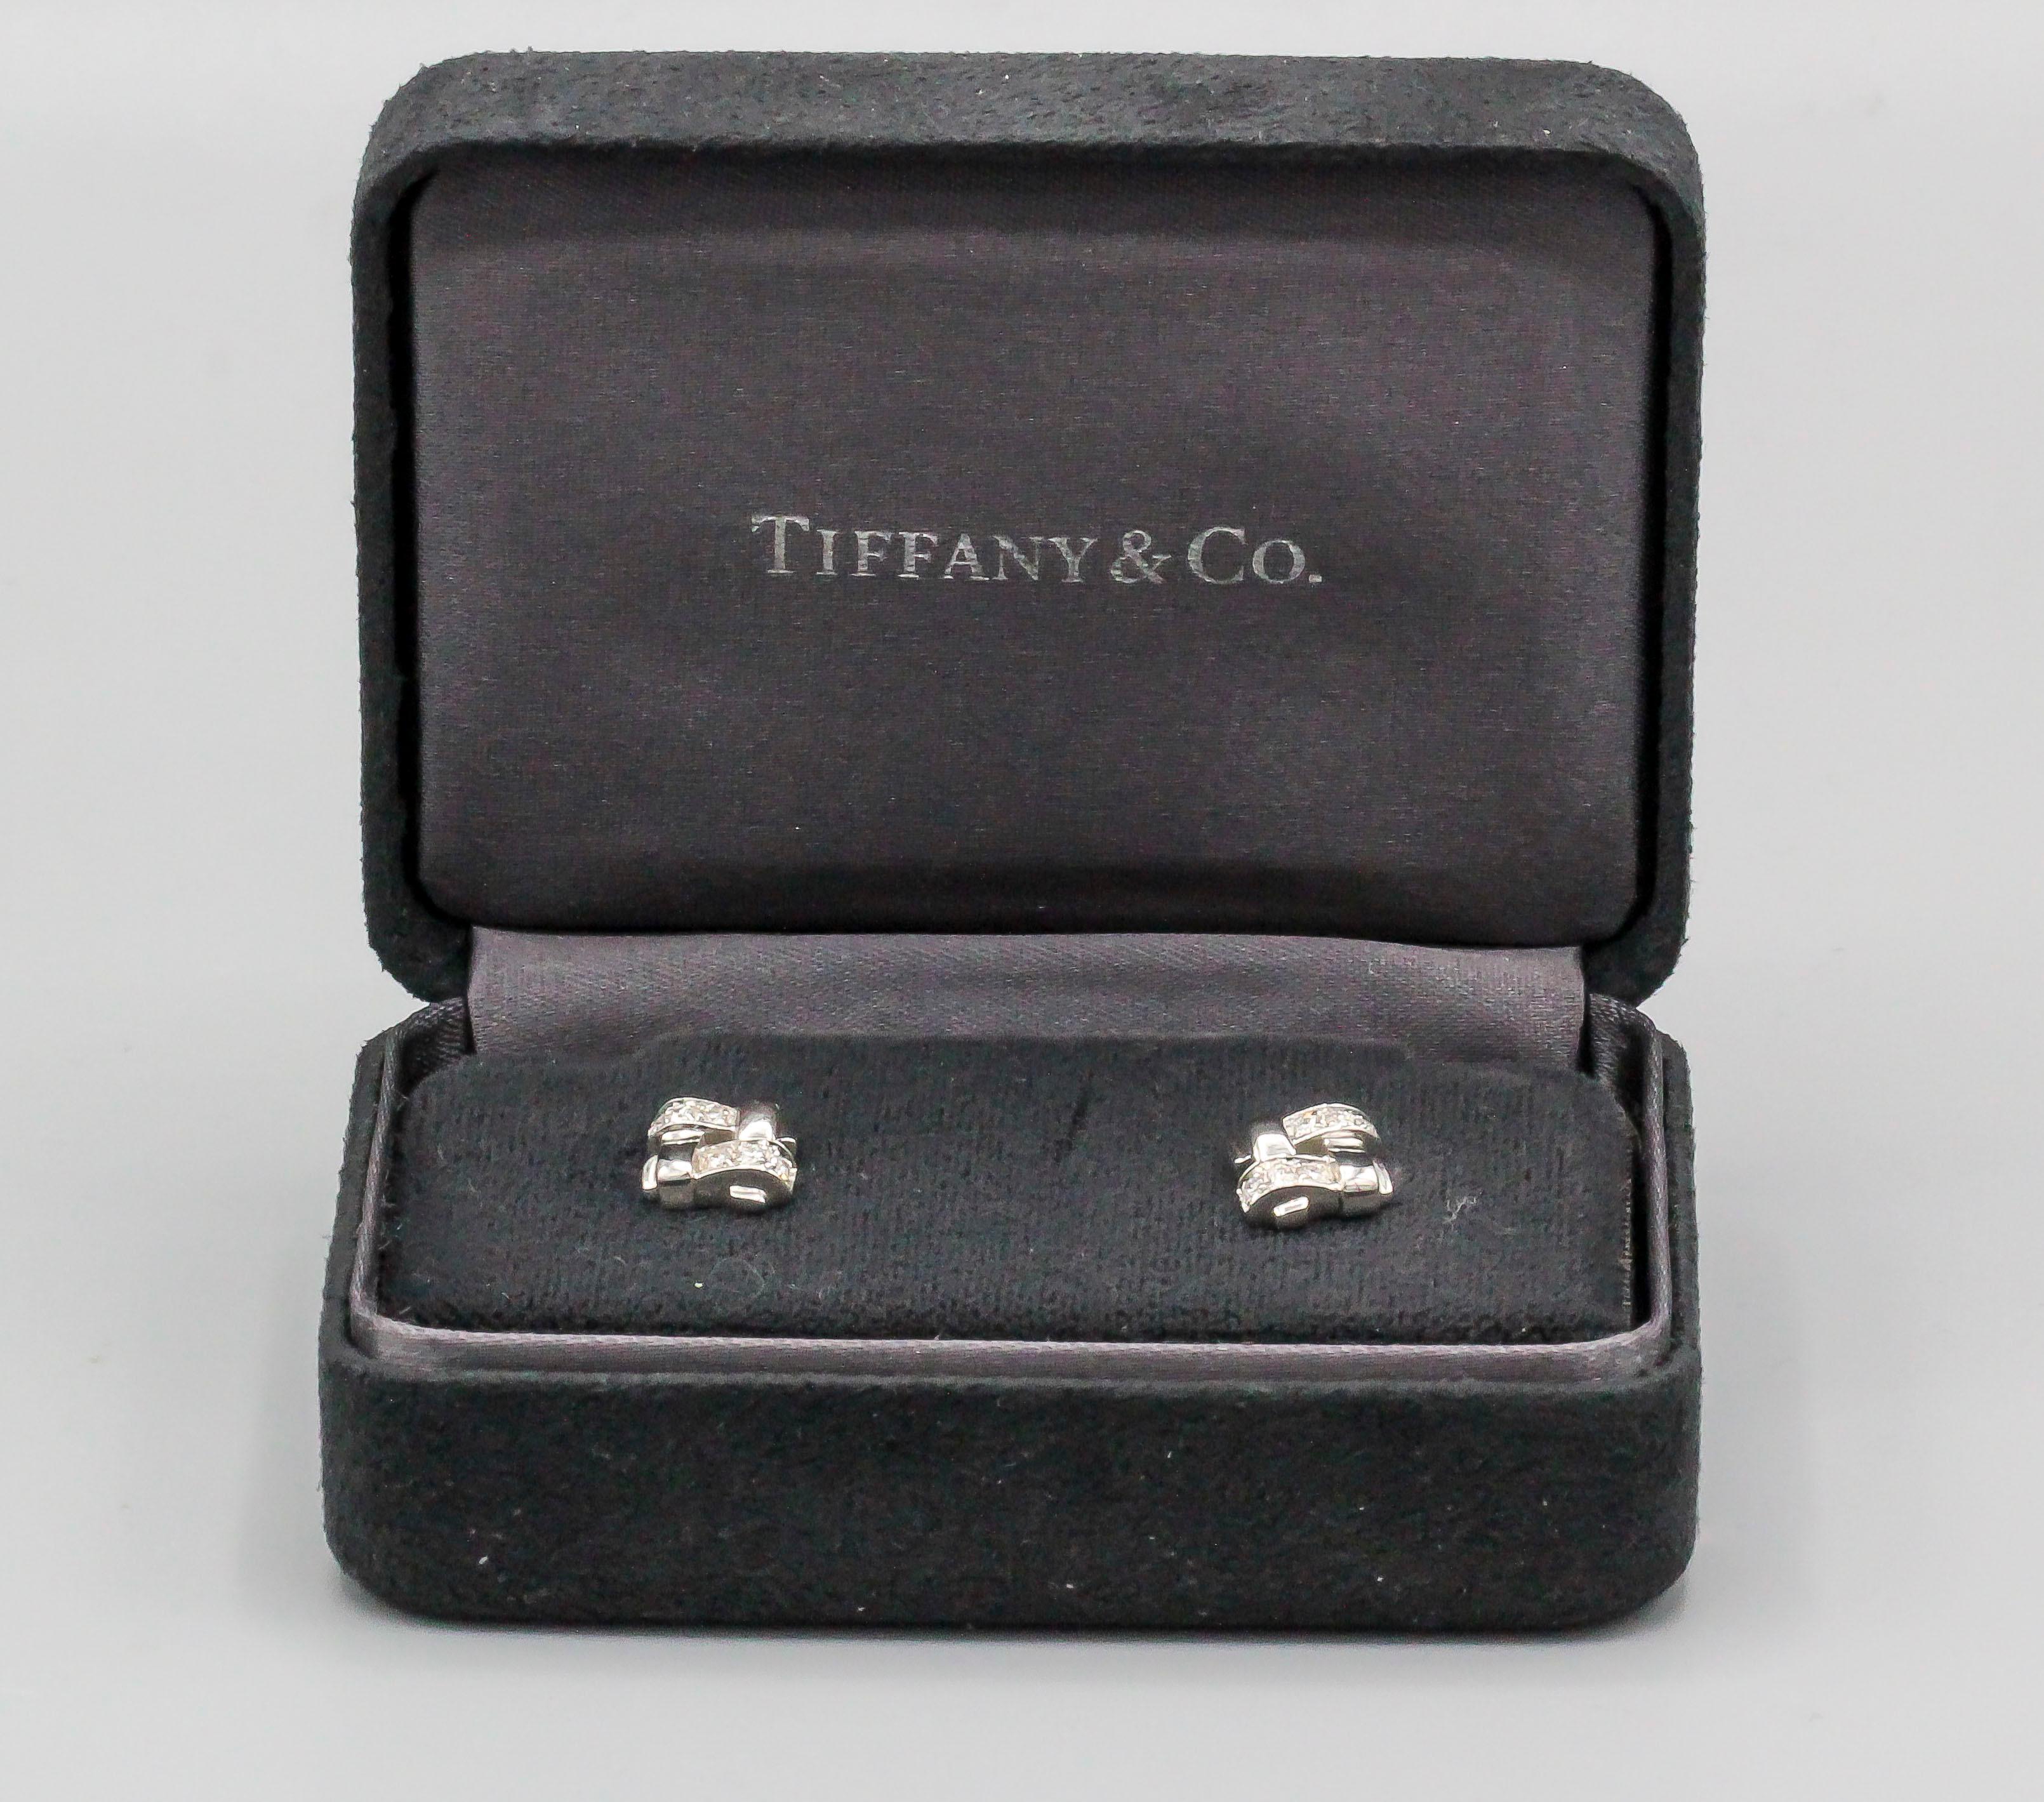 Fine pair of stud earrings in 18k white gold and set with diamonds by Tiffany & Co., circa 2002. 

Hallmarks: Tiffany & Co. Italy, 750, 2002.